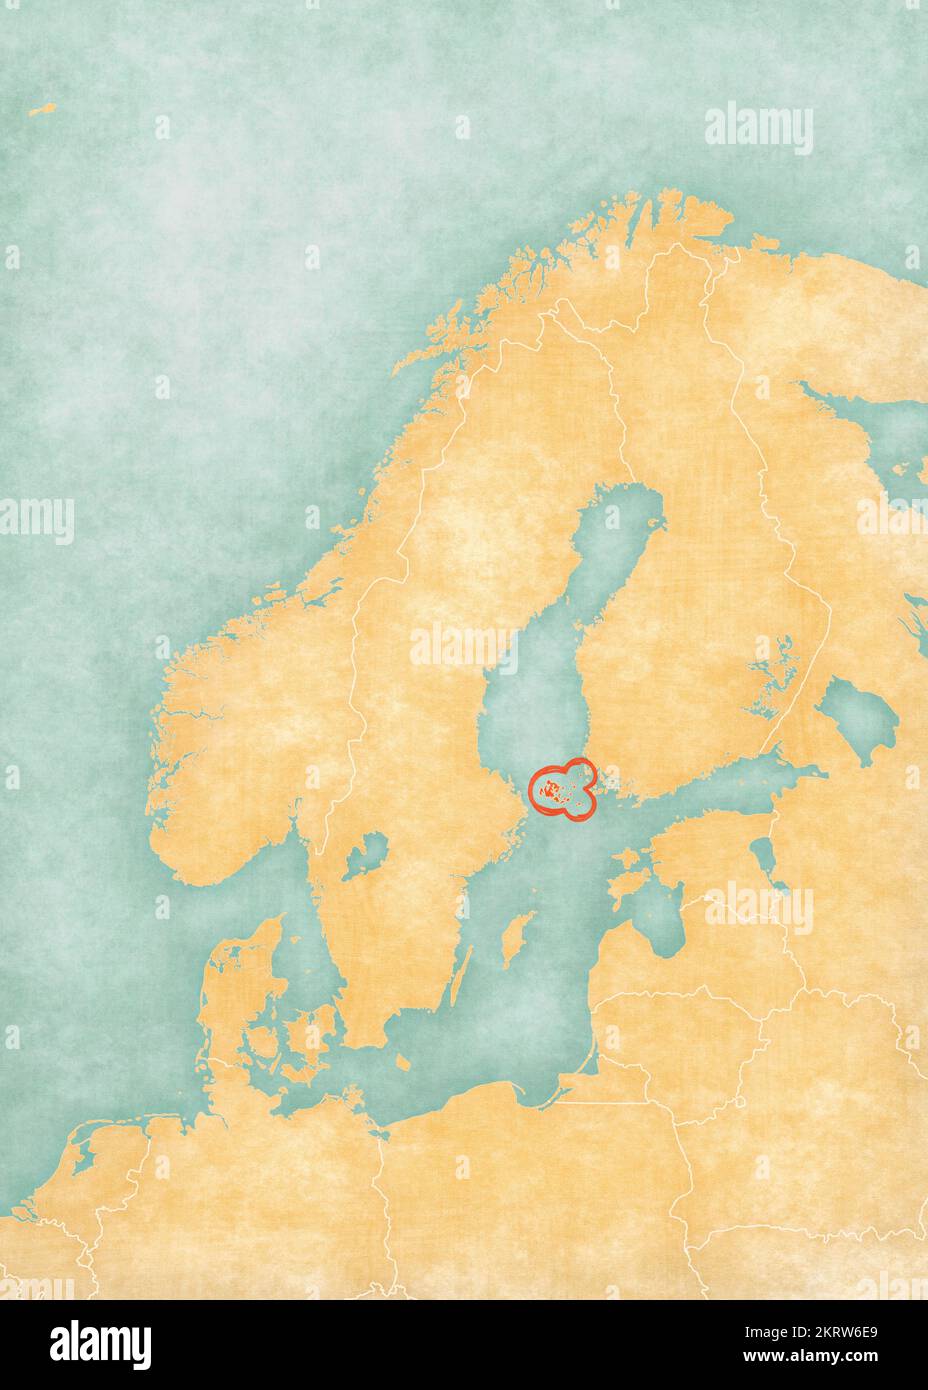 Aland Islands on the map of Scandinavia in soft grunge and vintage style, like old paper with watercolor painting. Stock Photo